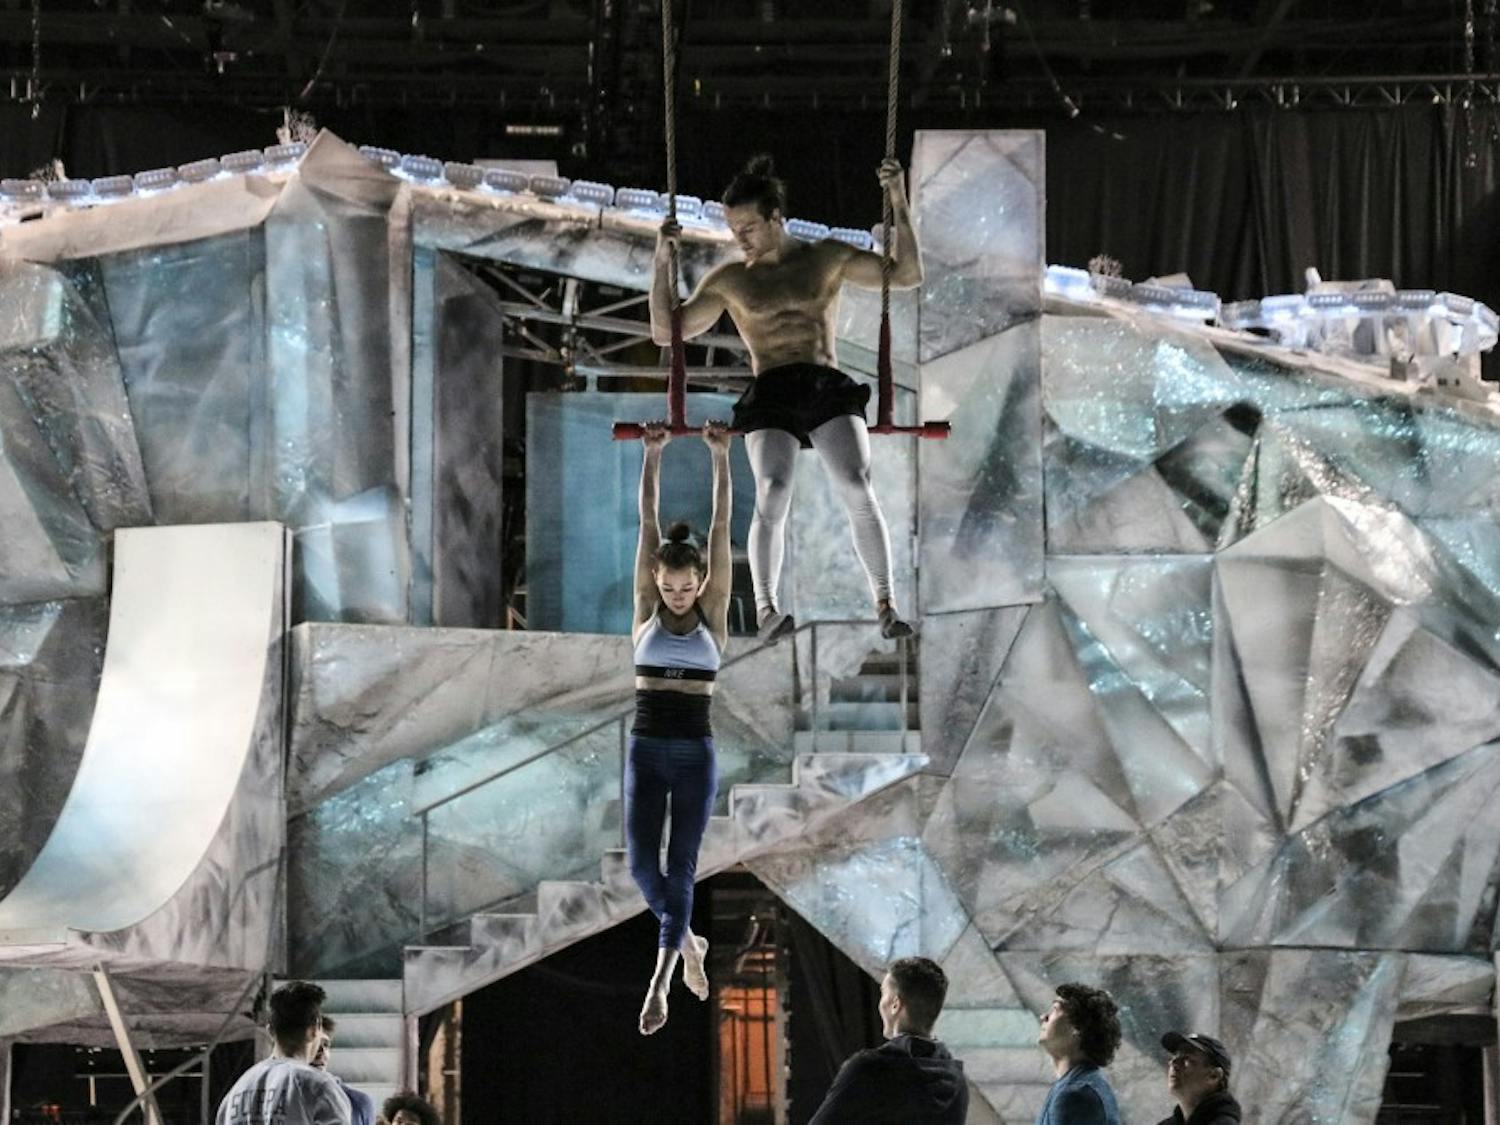 Performers for ?Cirque du Soleil: Crystal? practice aerial stunts before their premier show on Feb. 7, 2018.